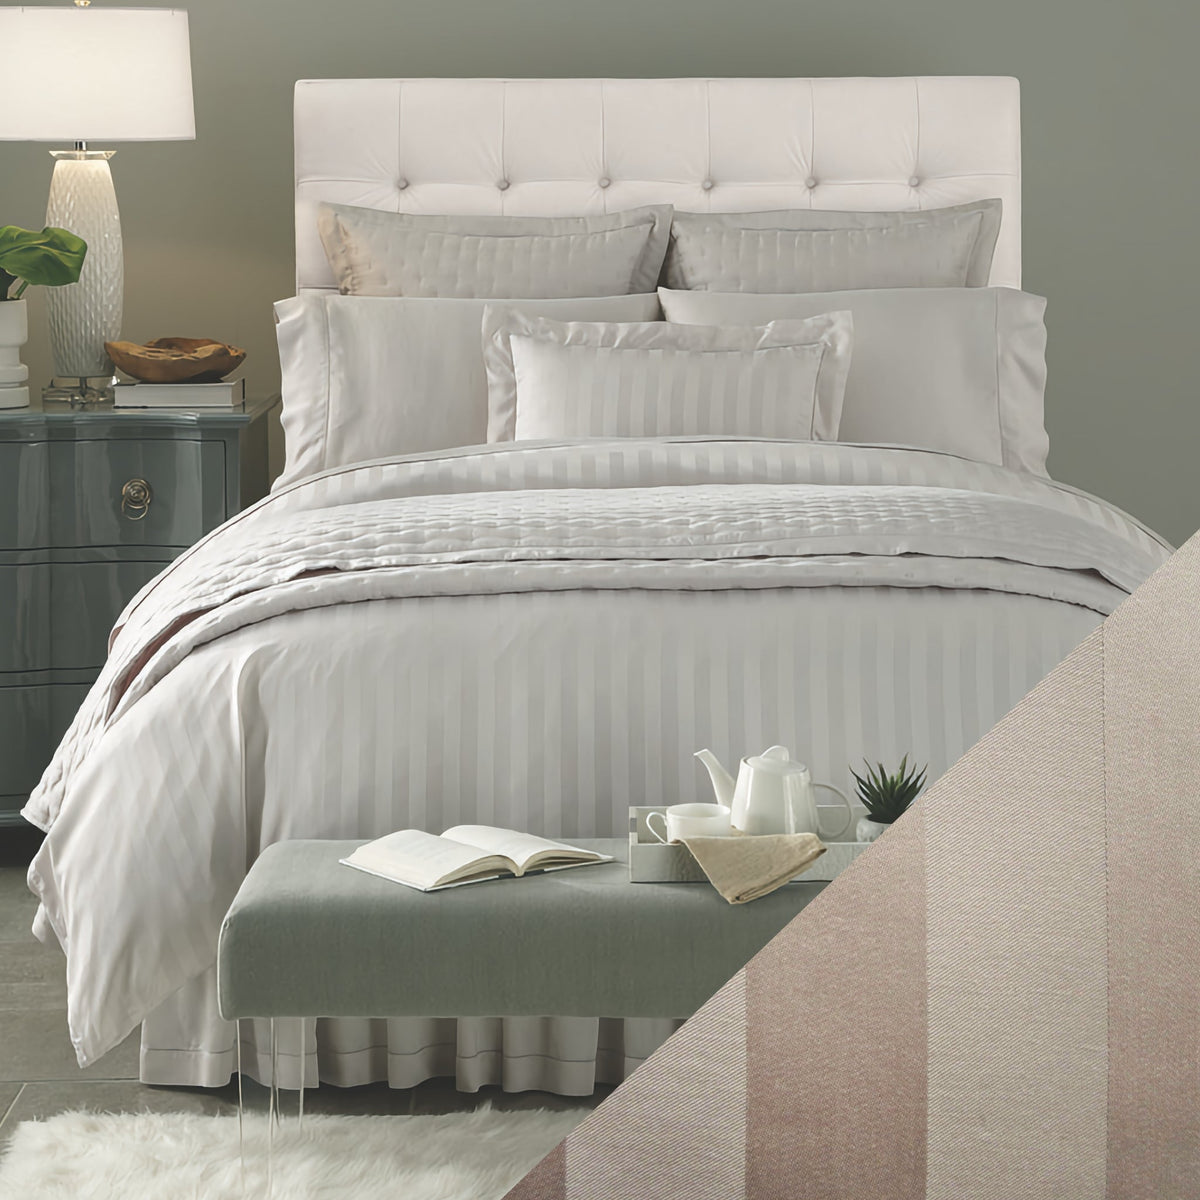 Home Treasures Athens Bedding Lifestyle Stripe Candlelight Fine Linens